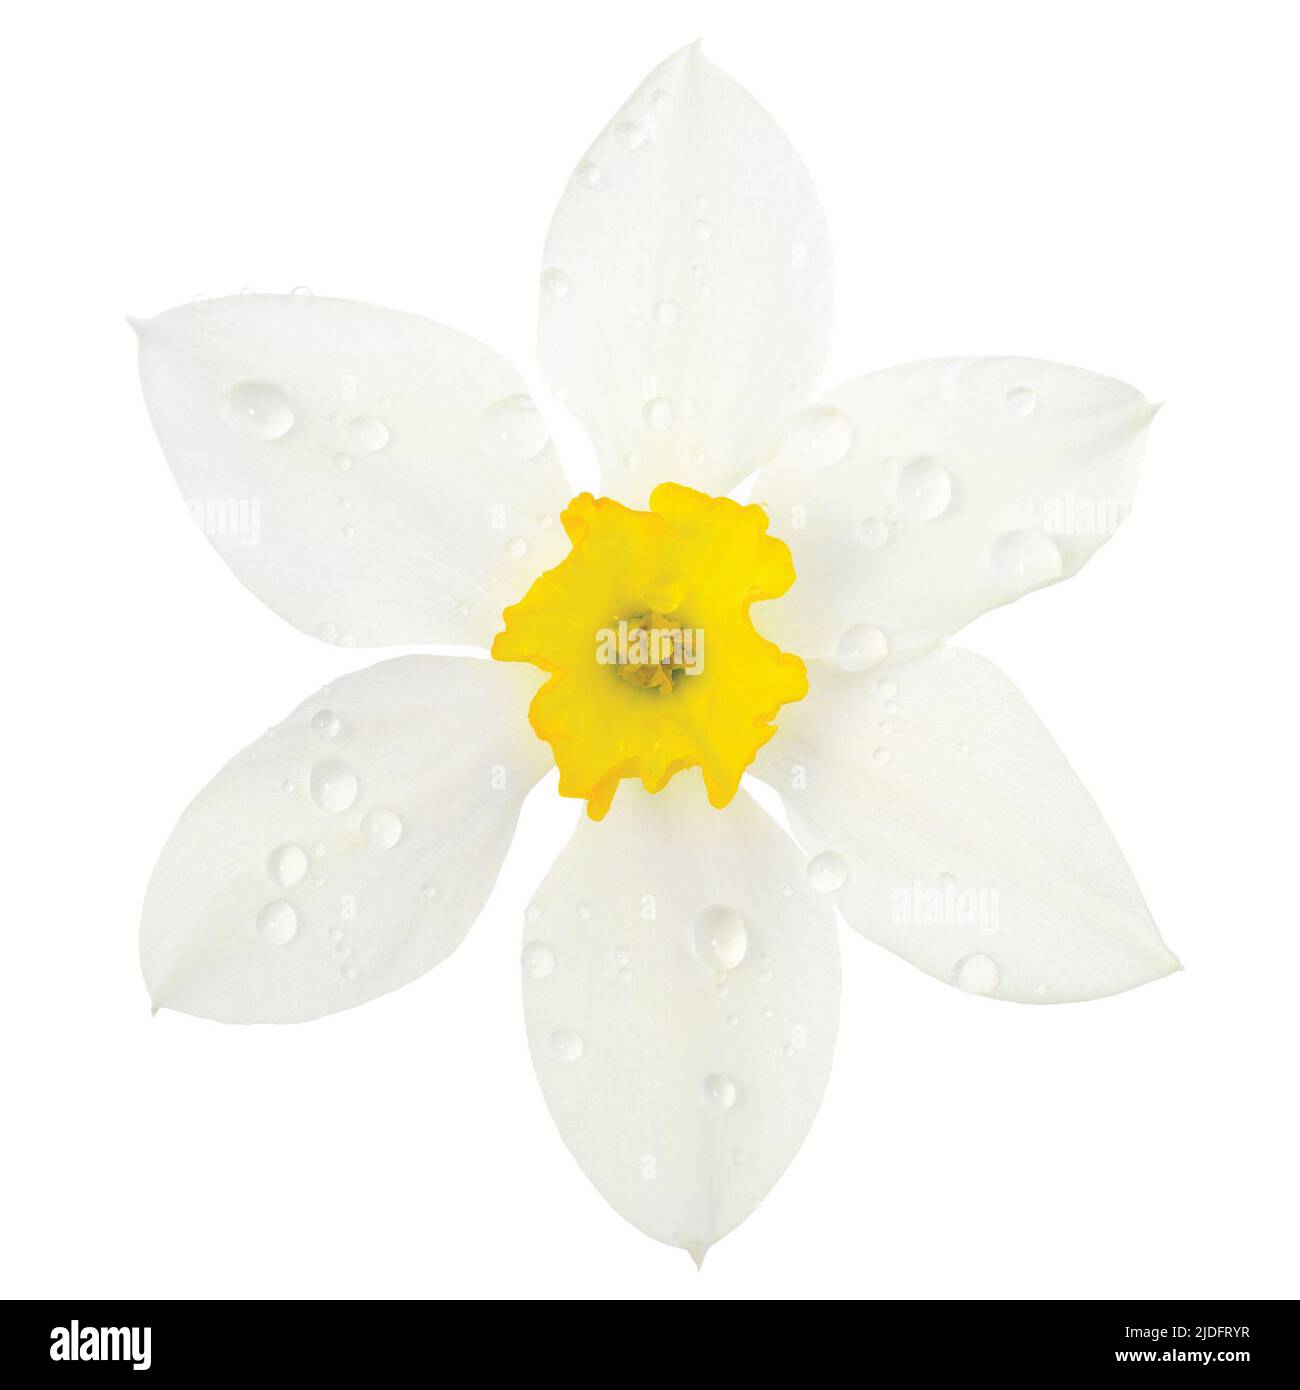 White daffodil narcissus L. blooming flower head, isolated flat lay, rain water droplets, yellow amaryllis jonquil stamen dew drops, detailed macro Stock Photo